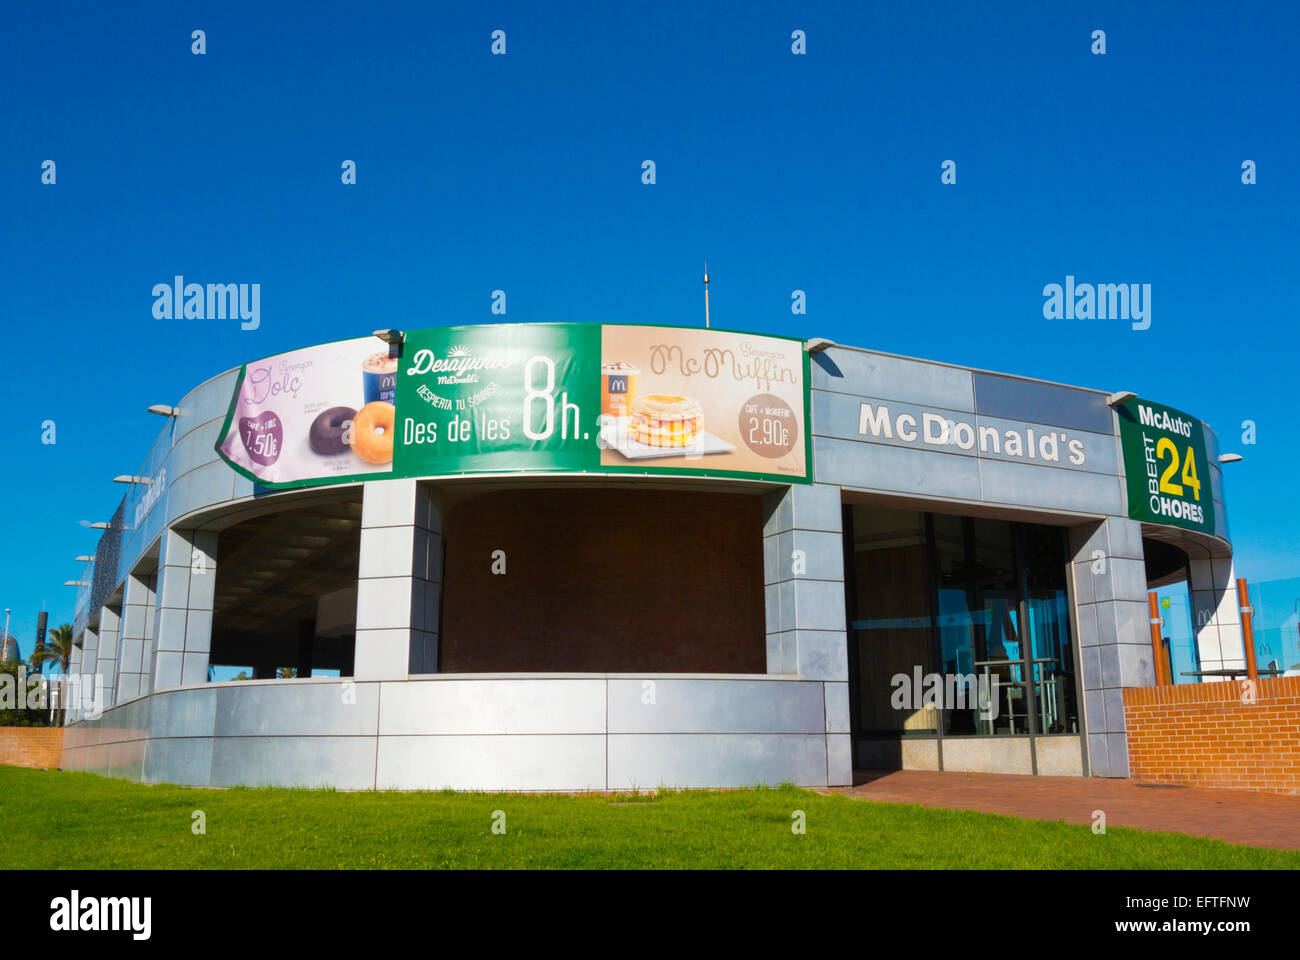 How do you find 24-hour McDonald's locations?